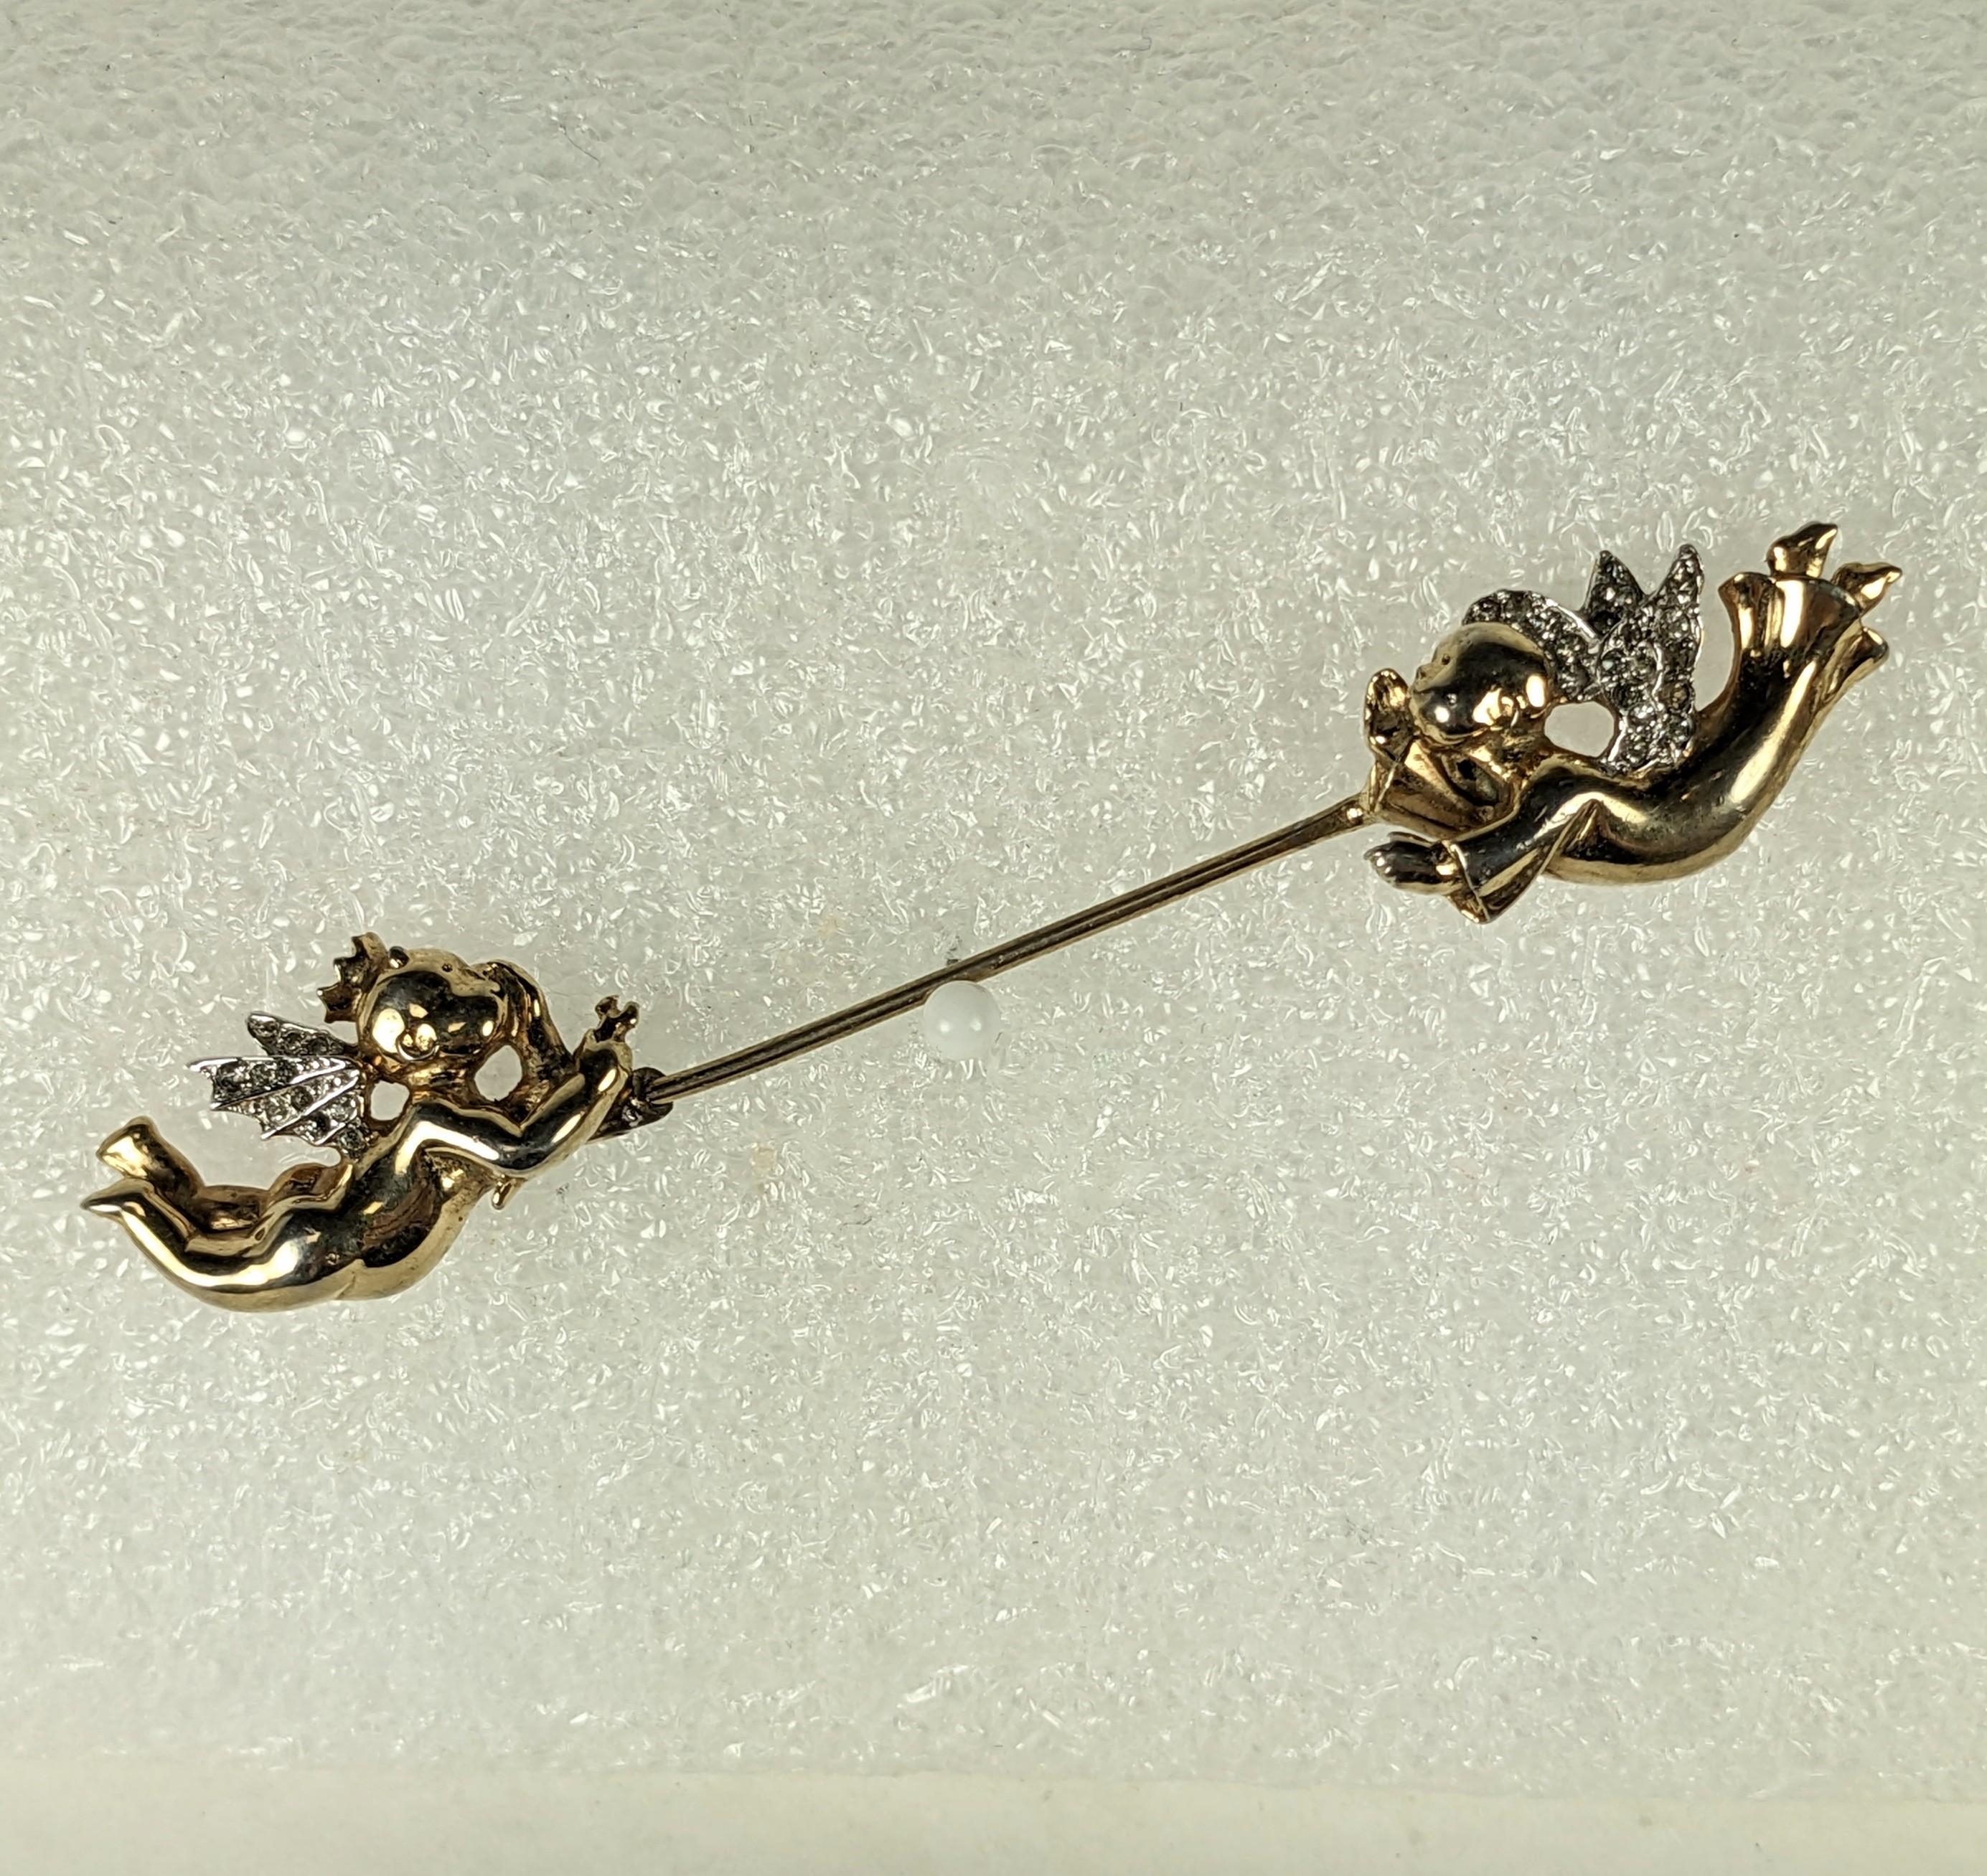 Rare Mazer, Joseph Wuyts Whispering Angel Jabot Pin from 1940's USA of gilt metal with pave accents. Rare collectable series from Mazer. 
3.5